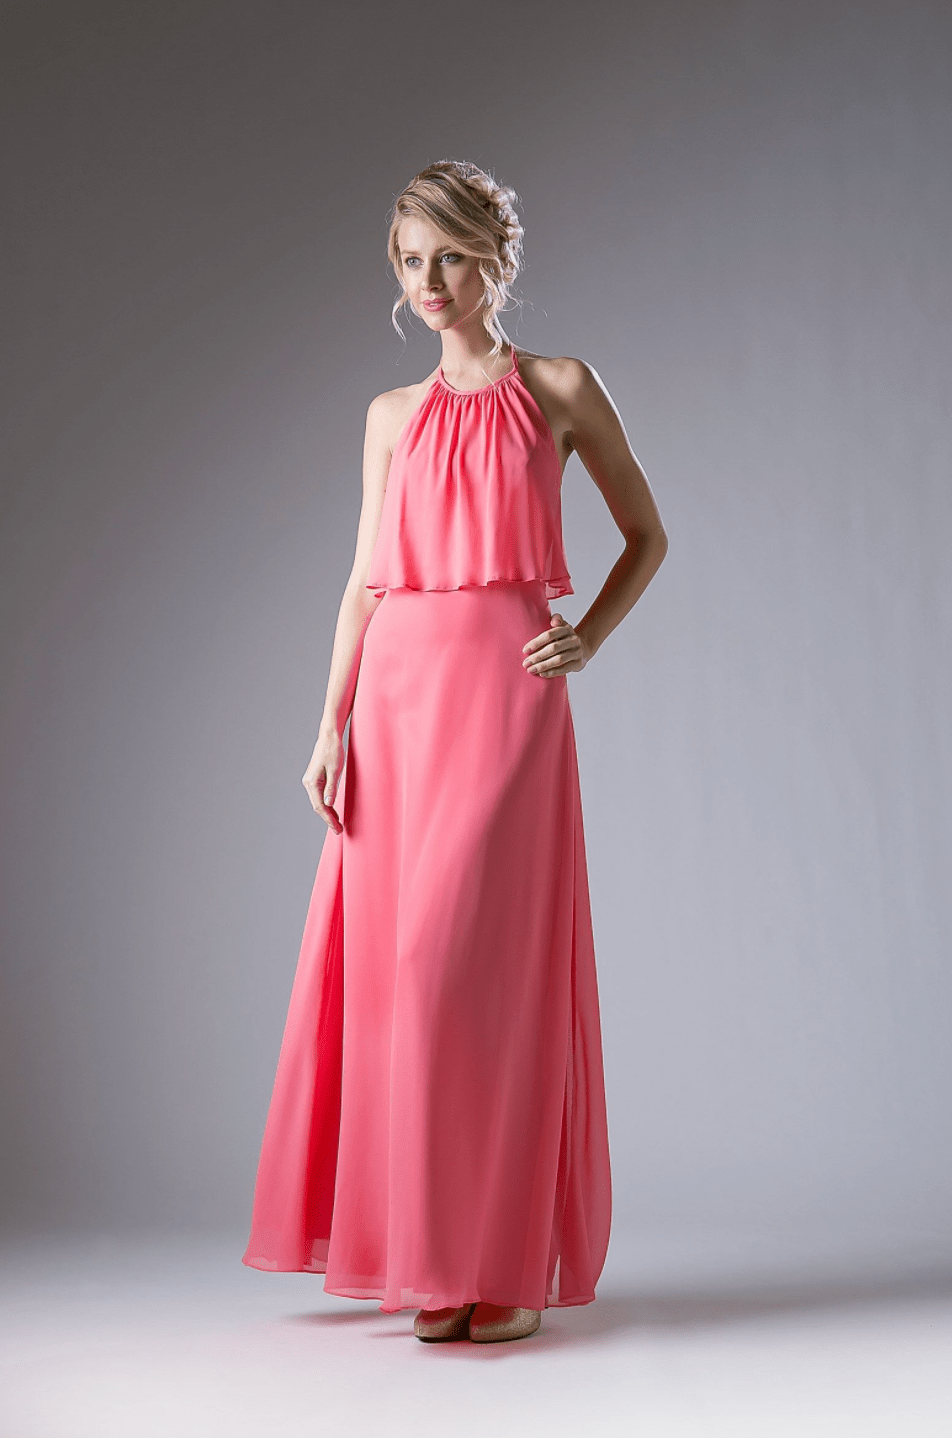 Halter Chiffon Long Dress By Cinderella Divine - NORMA REED